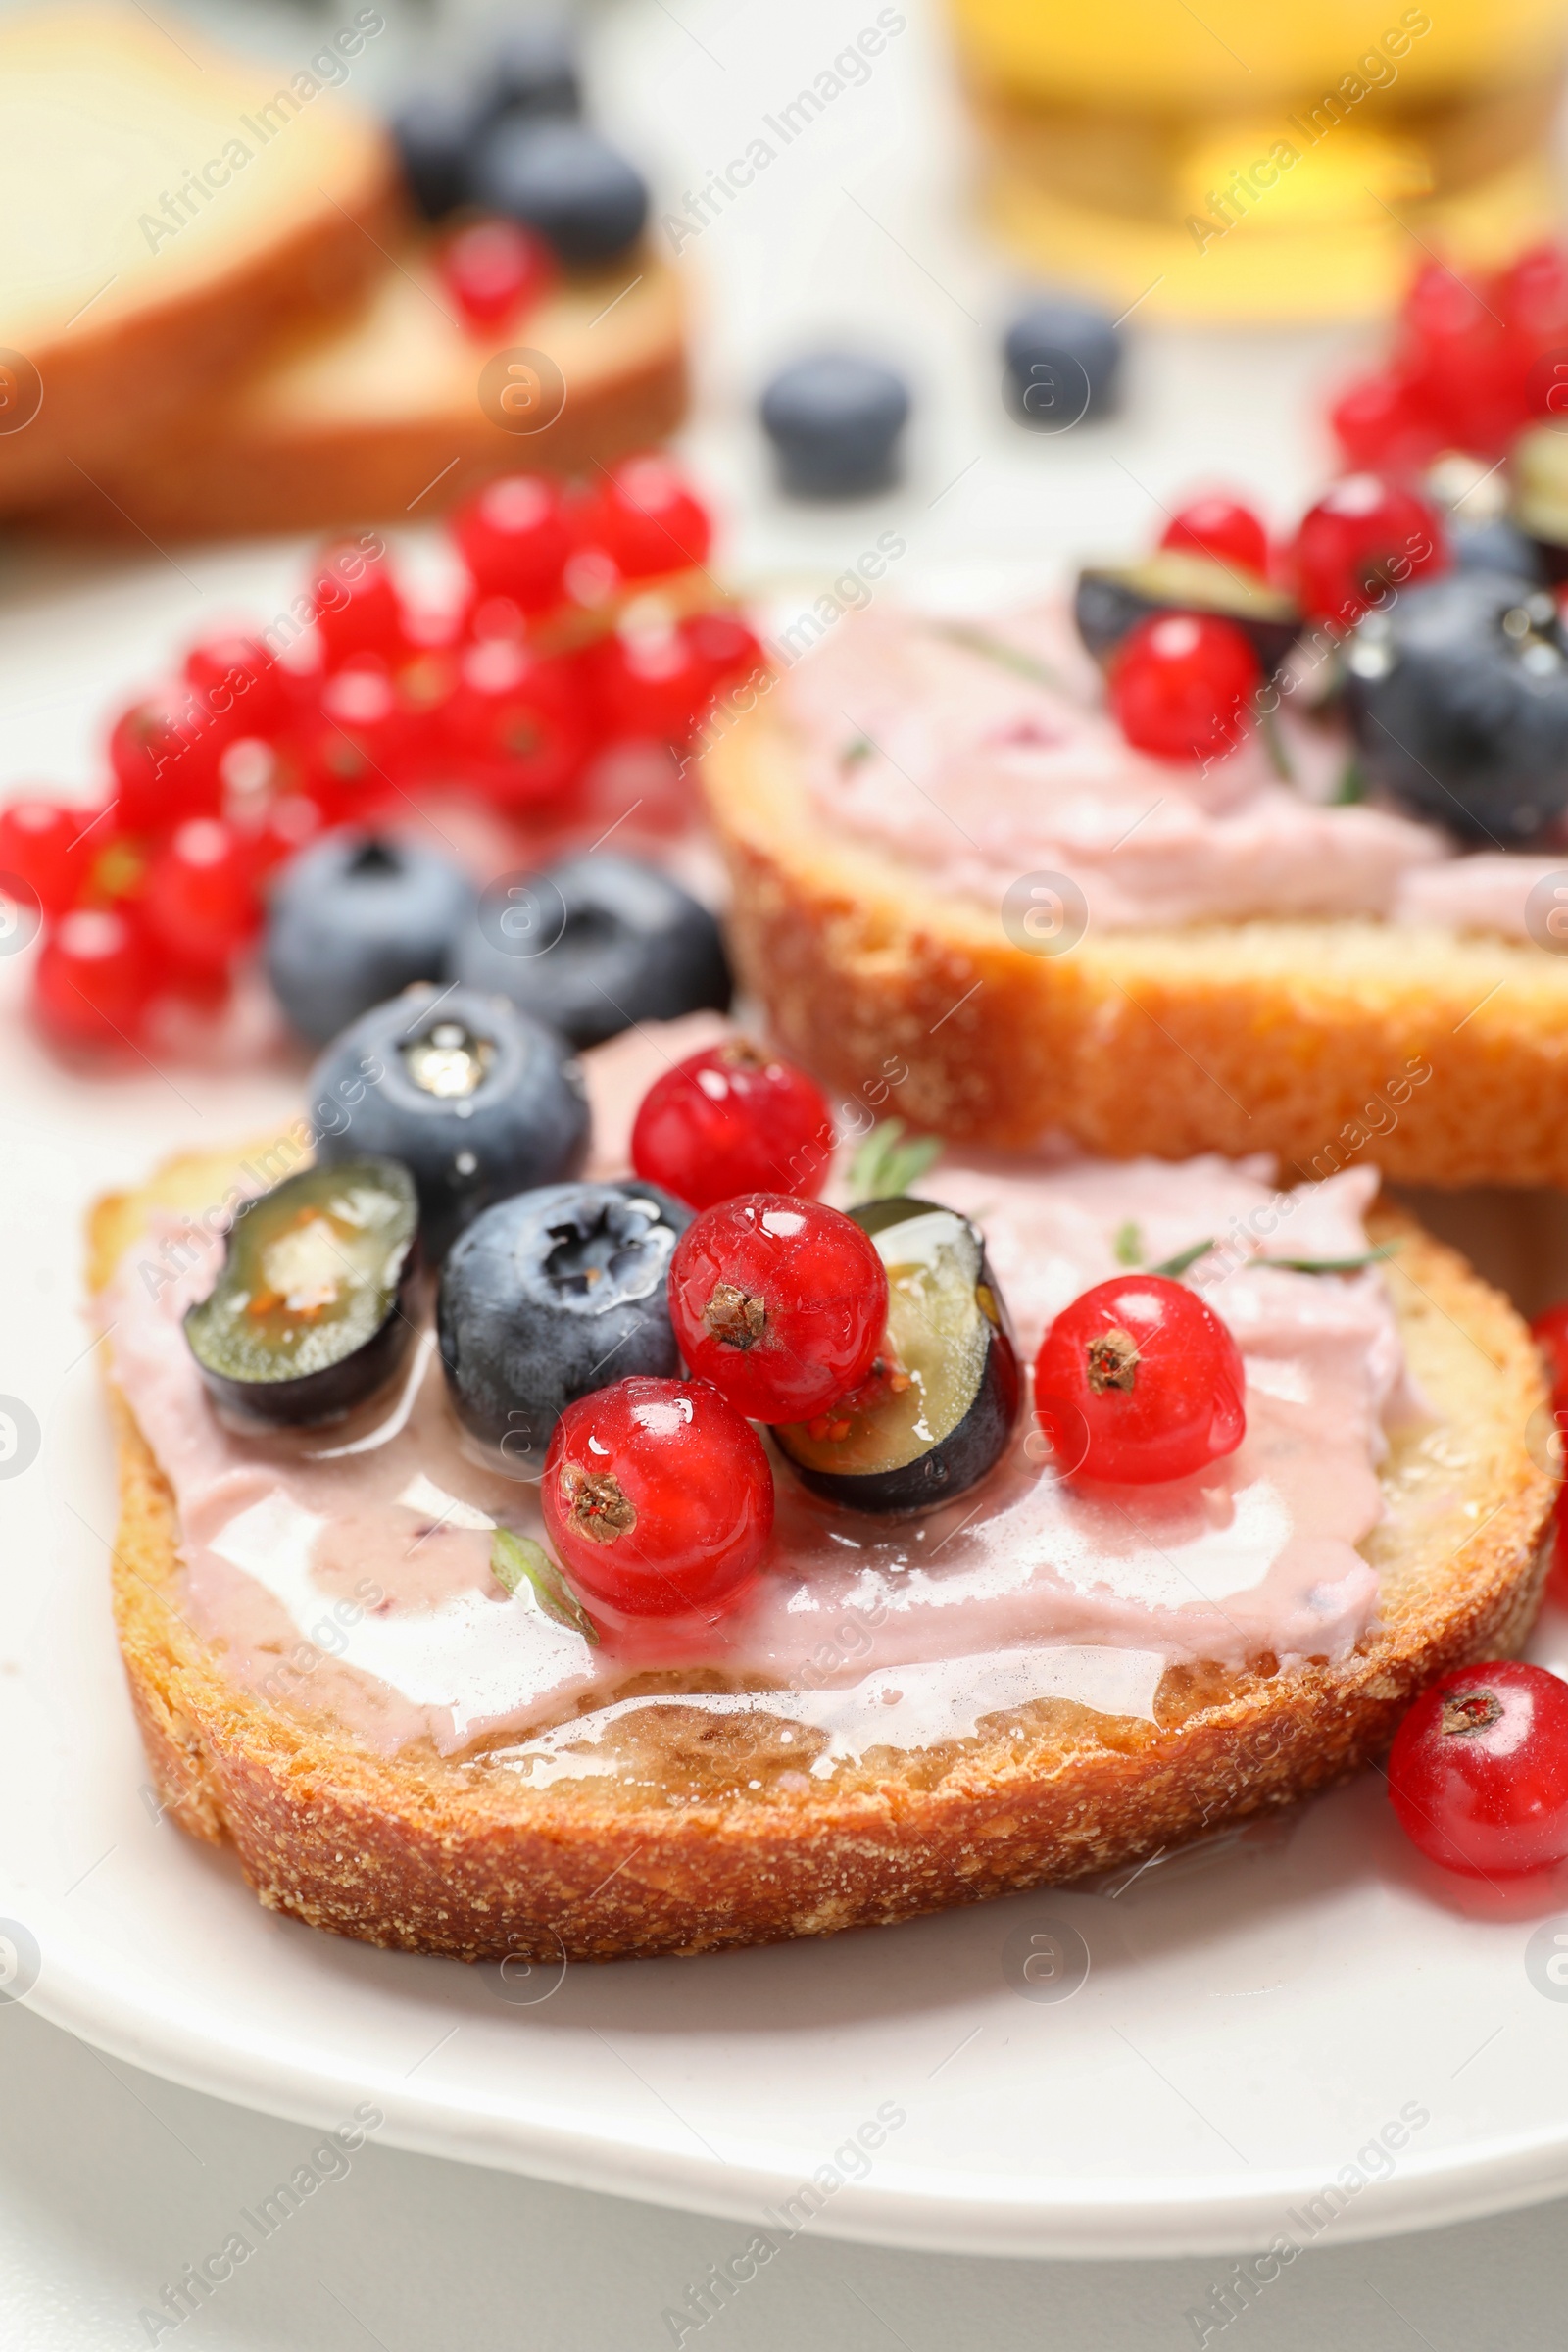 Photo of Tasty sandwiches with cream cheese, blueberries and red currants, closeup